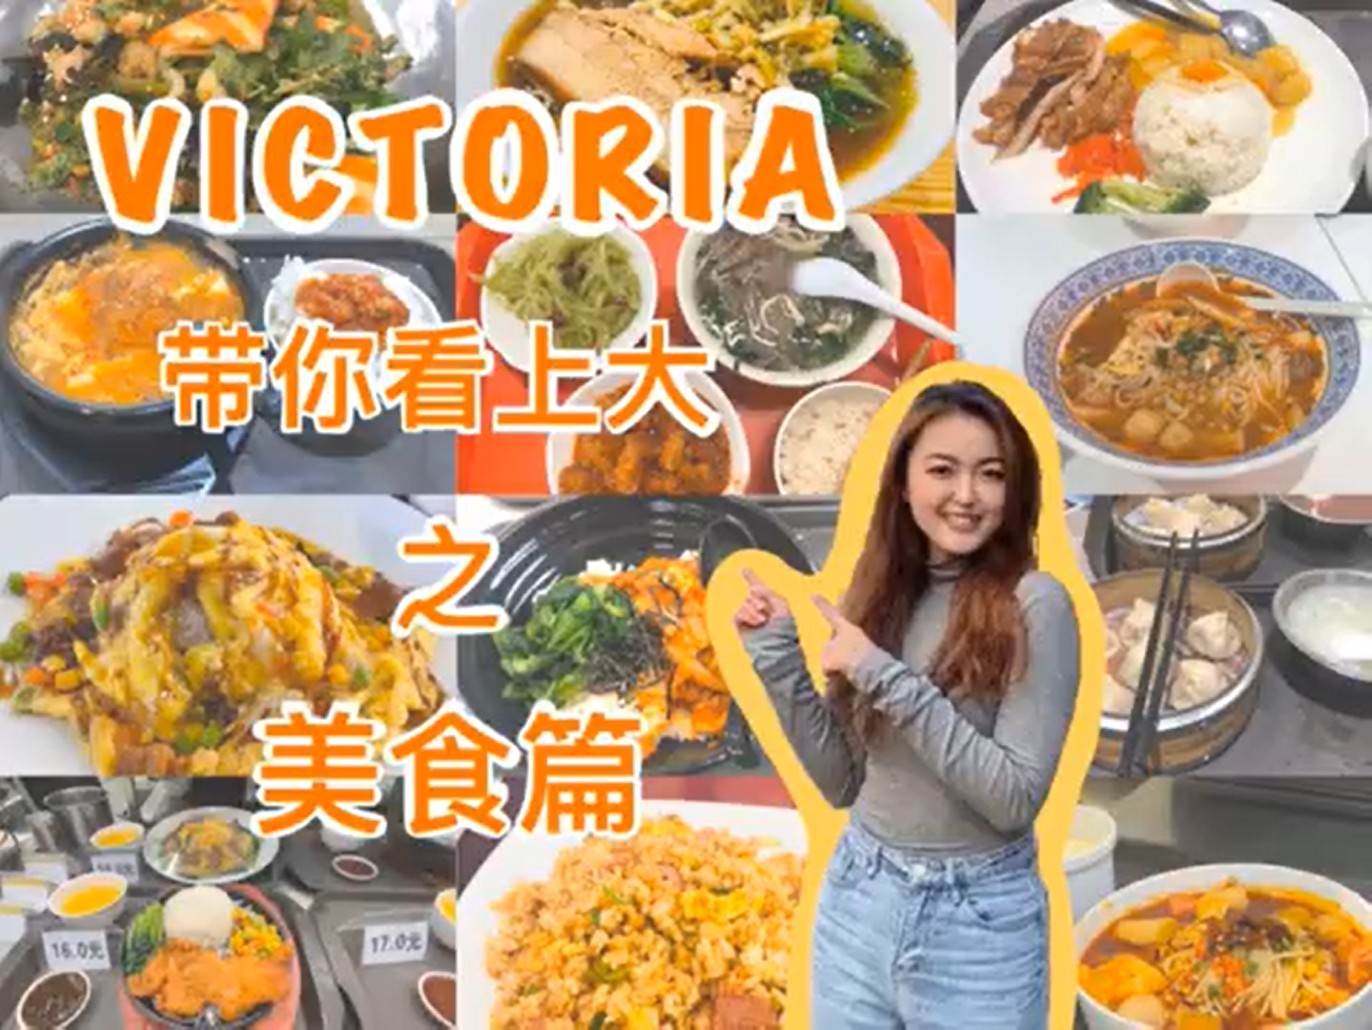 Food Hunting with Victoria in Shanghai University